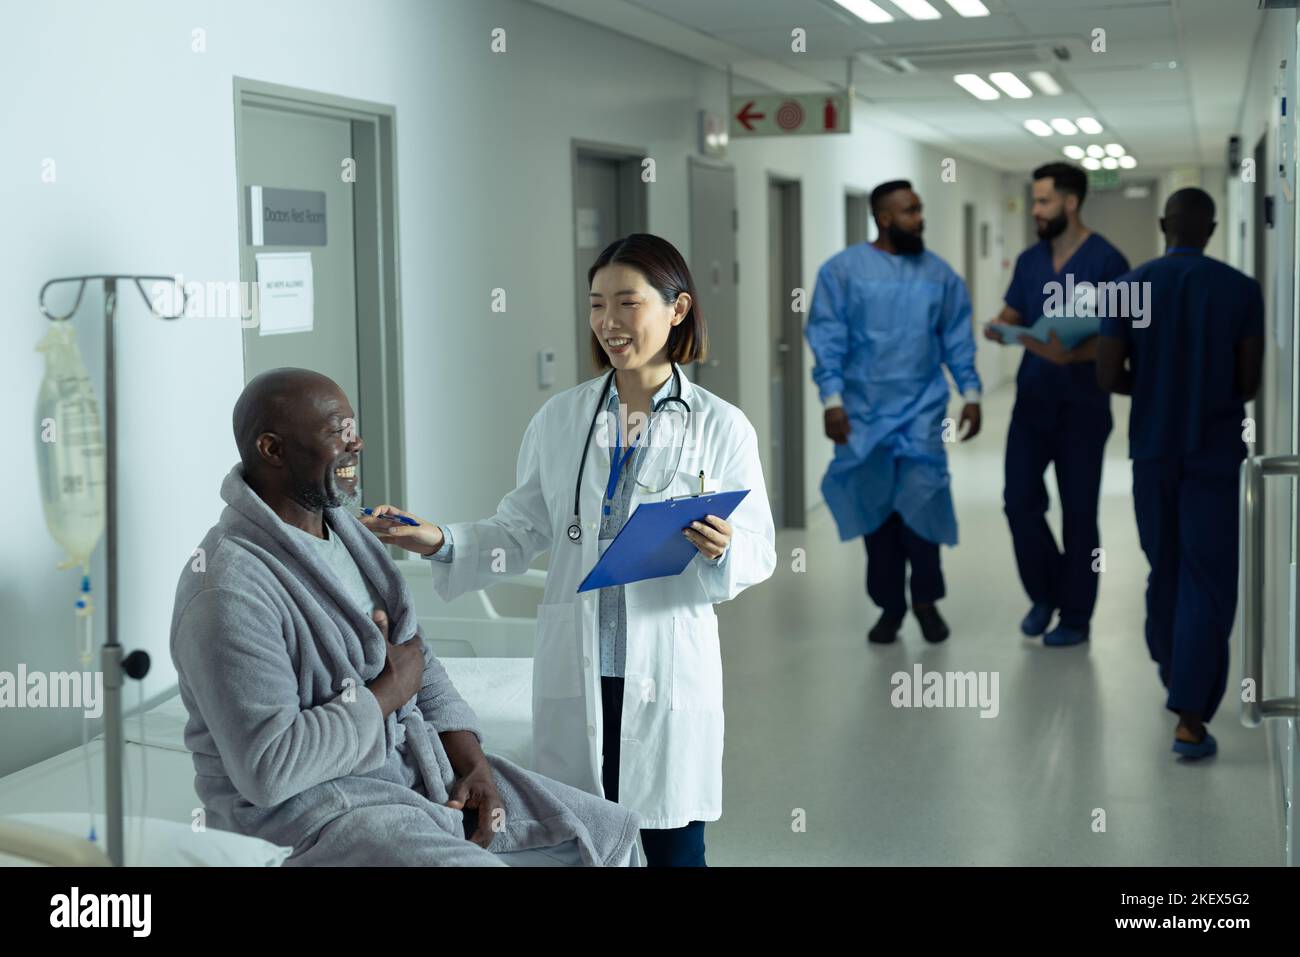 Asian female doctor and senior african american male patient smiling together in hospital corridor. Hospital, medical and healthcare services. Stock Photo